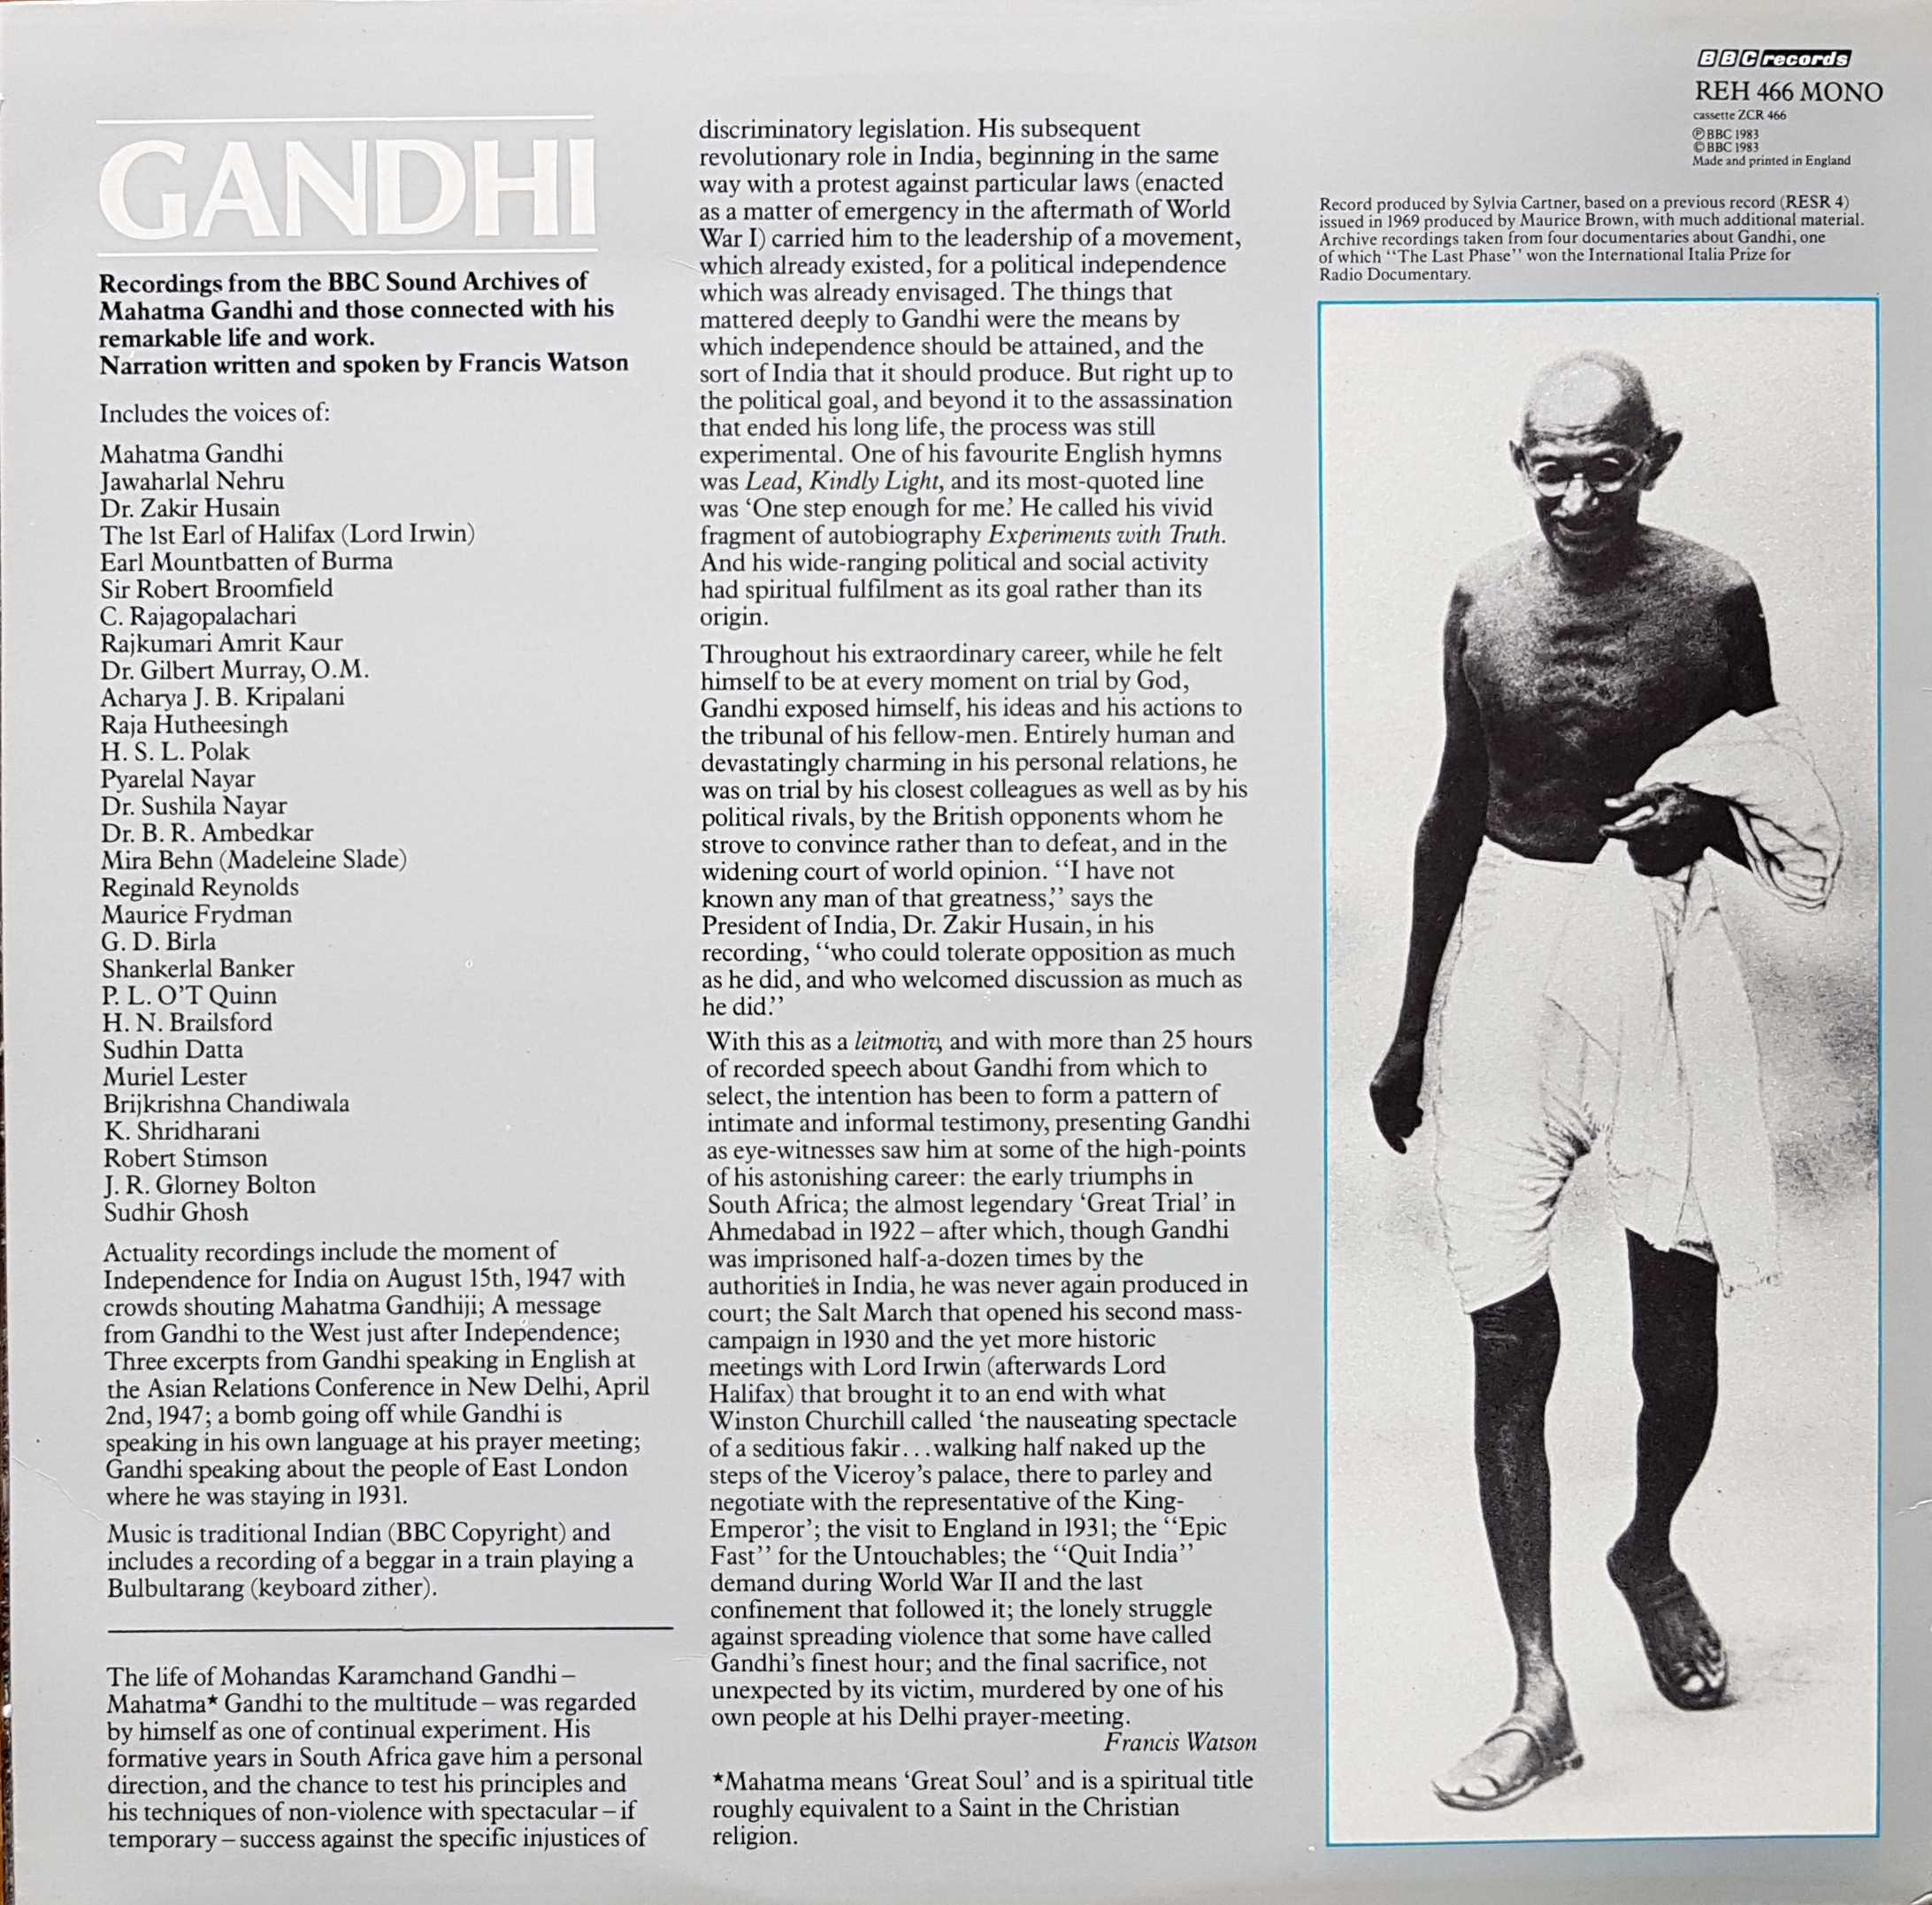 Picture of REH 466 Gandhi by artist Various from the BBC records and Tapes library